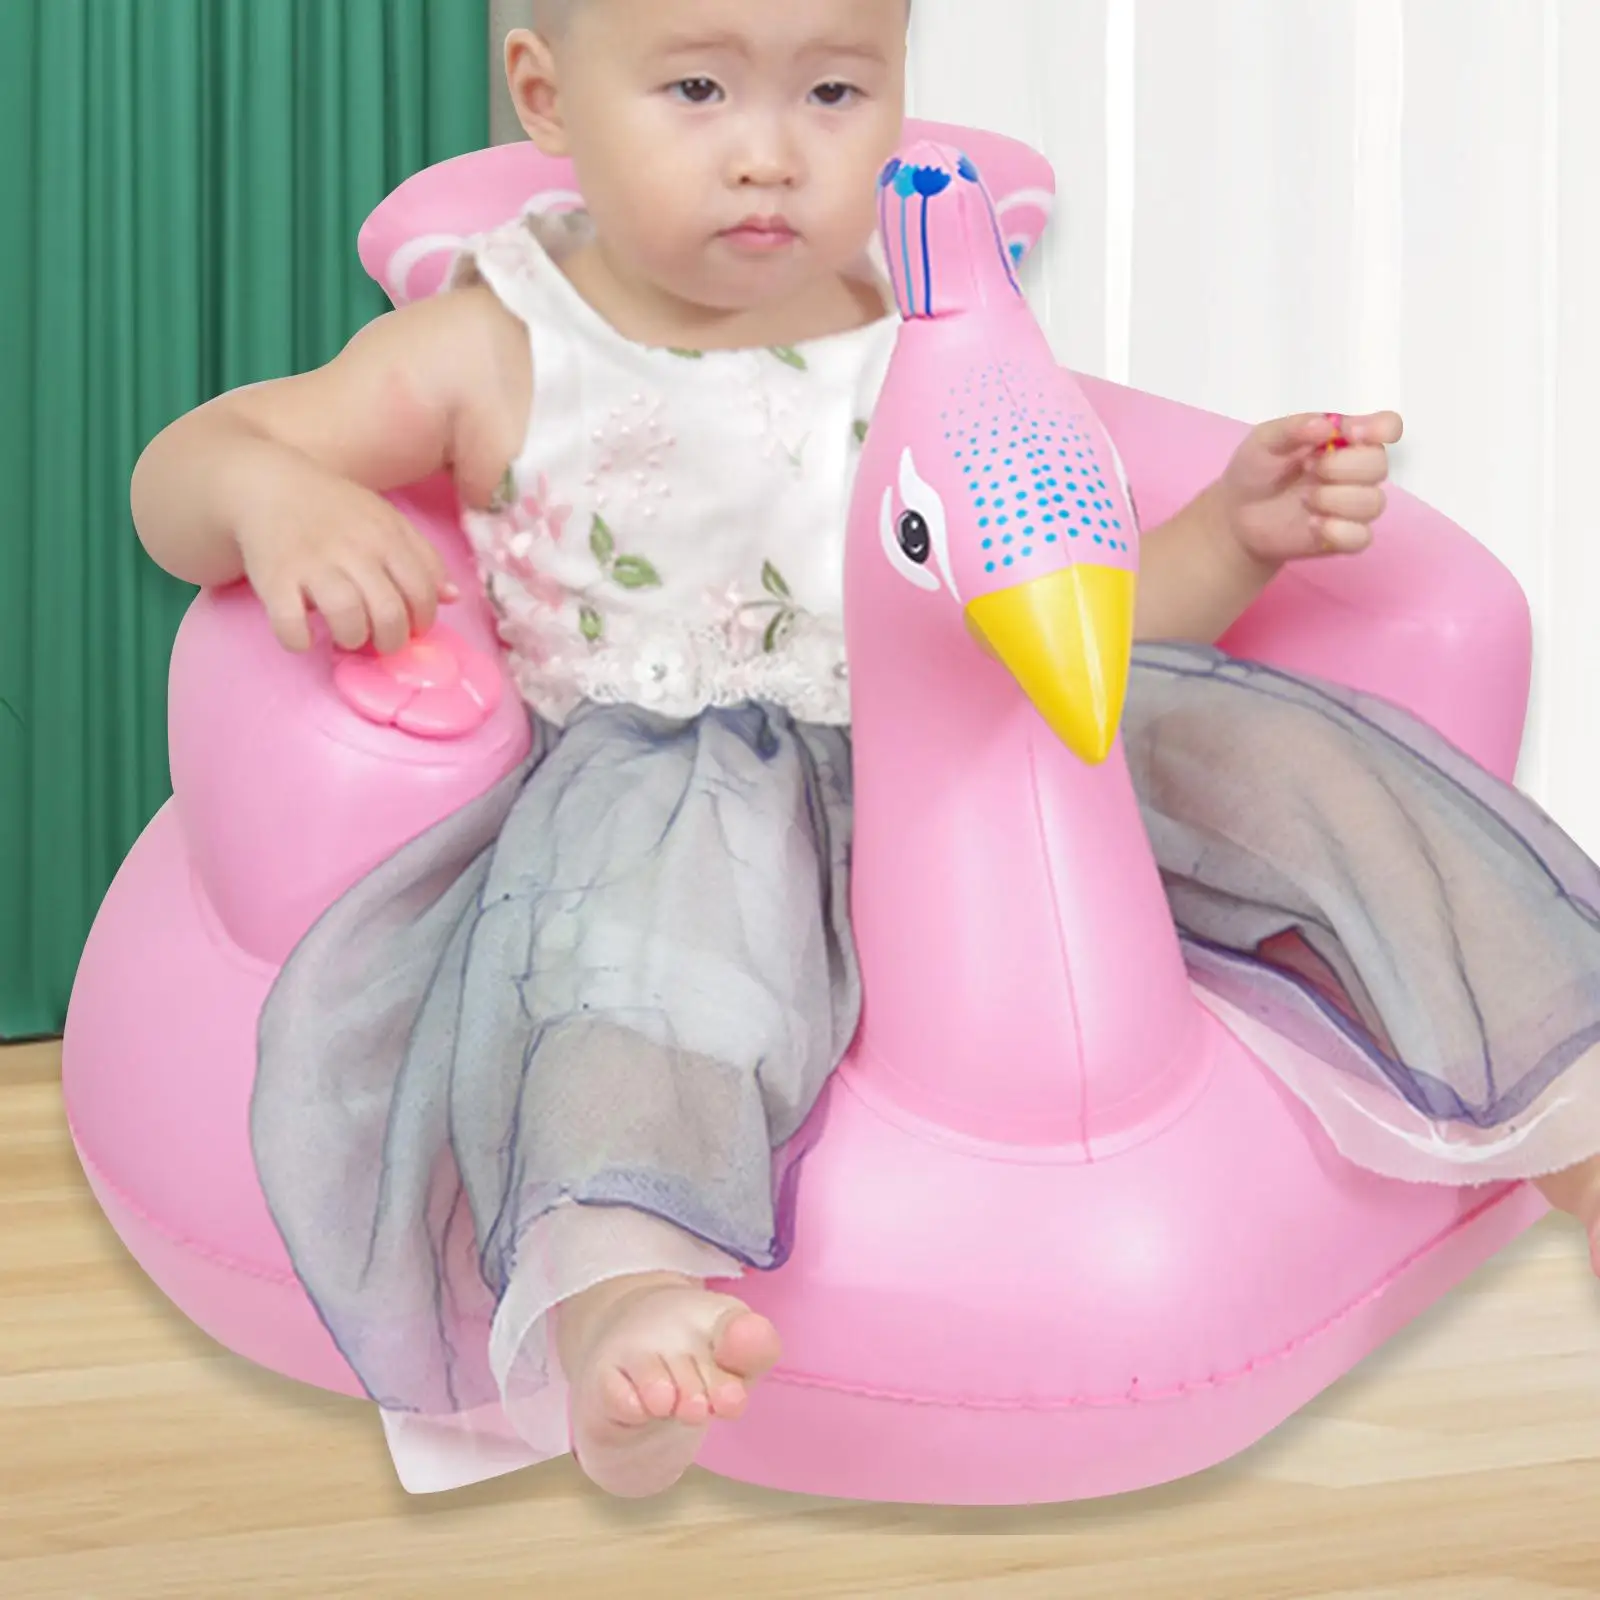 Inflatable Bathtub for Baby & Toddler, Baby Bath Seat Toddler Bath Time Fun